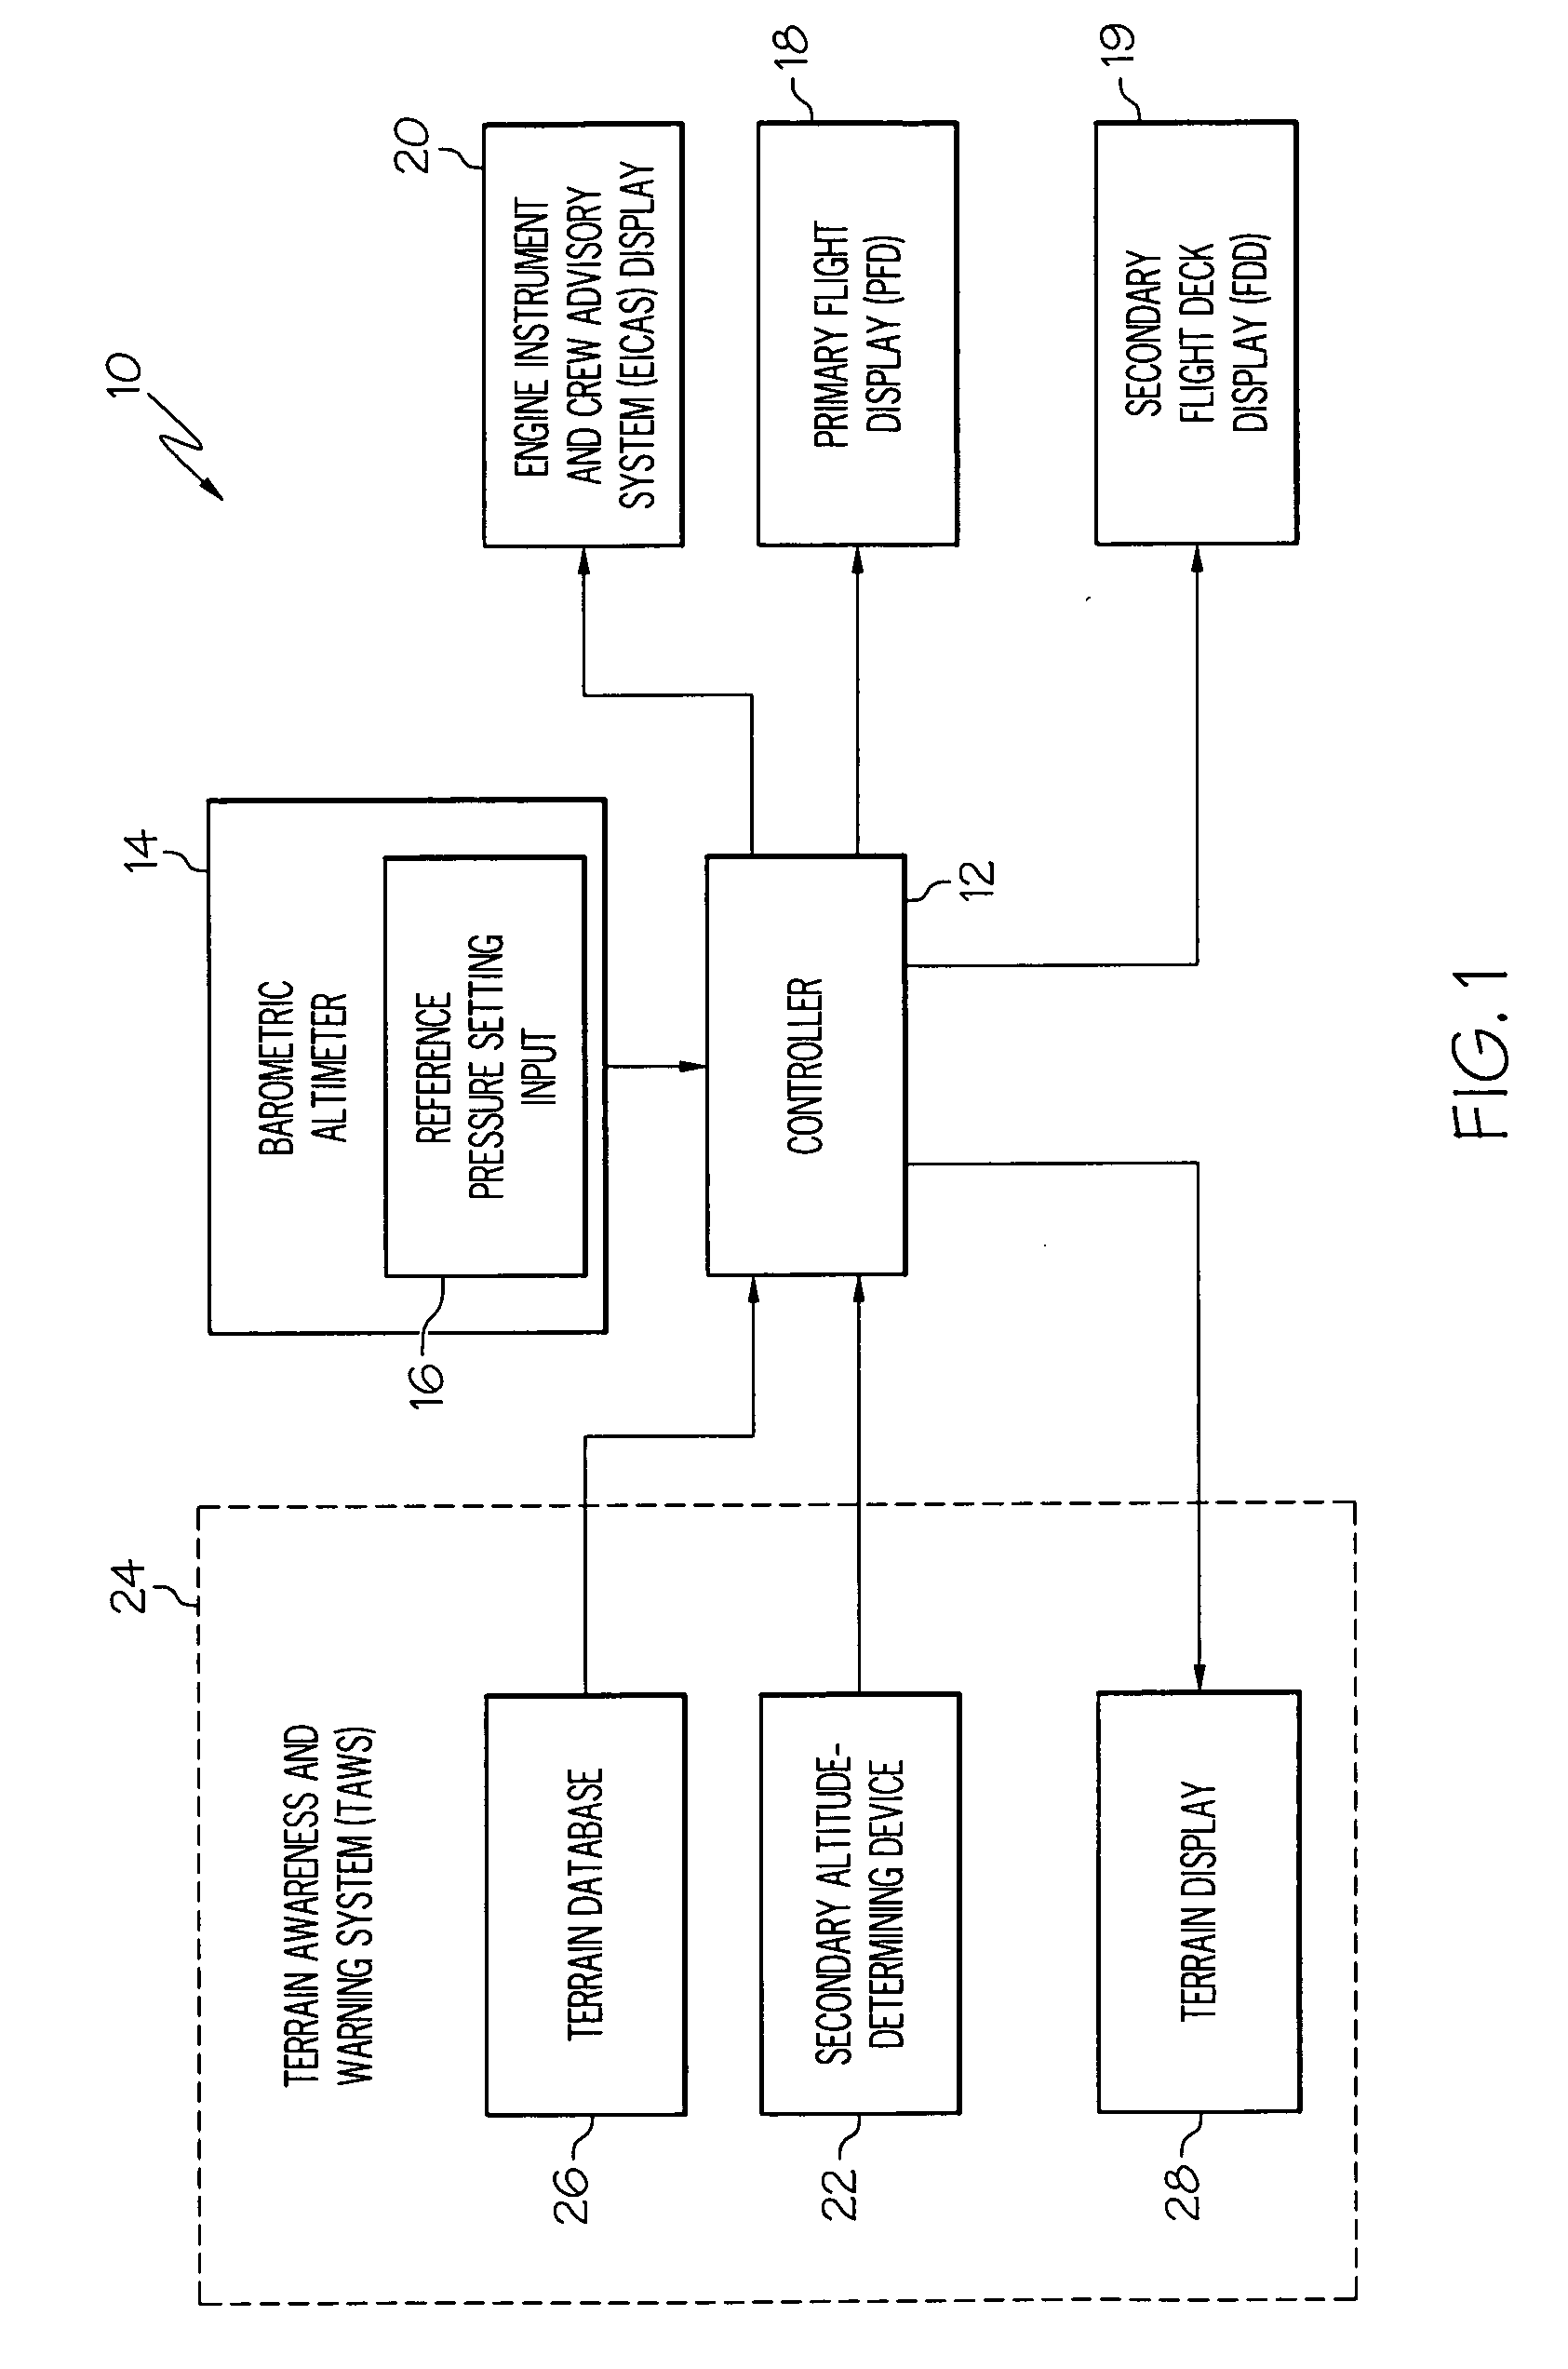 System and method for generating an altimeter mis-set alert on a primary flight display